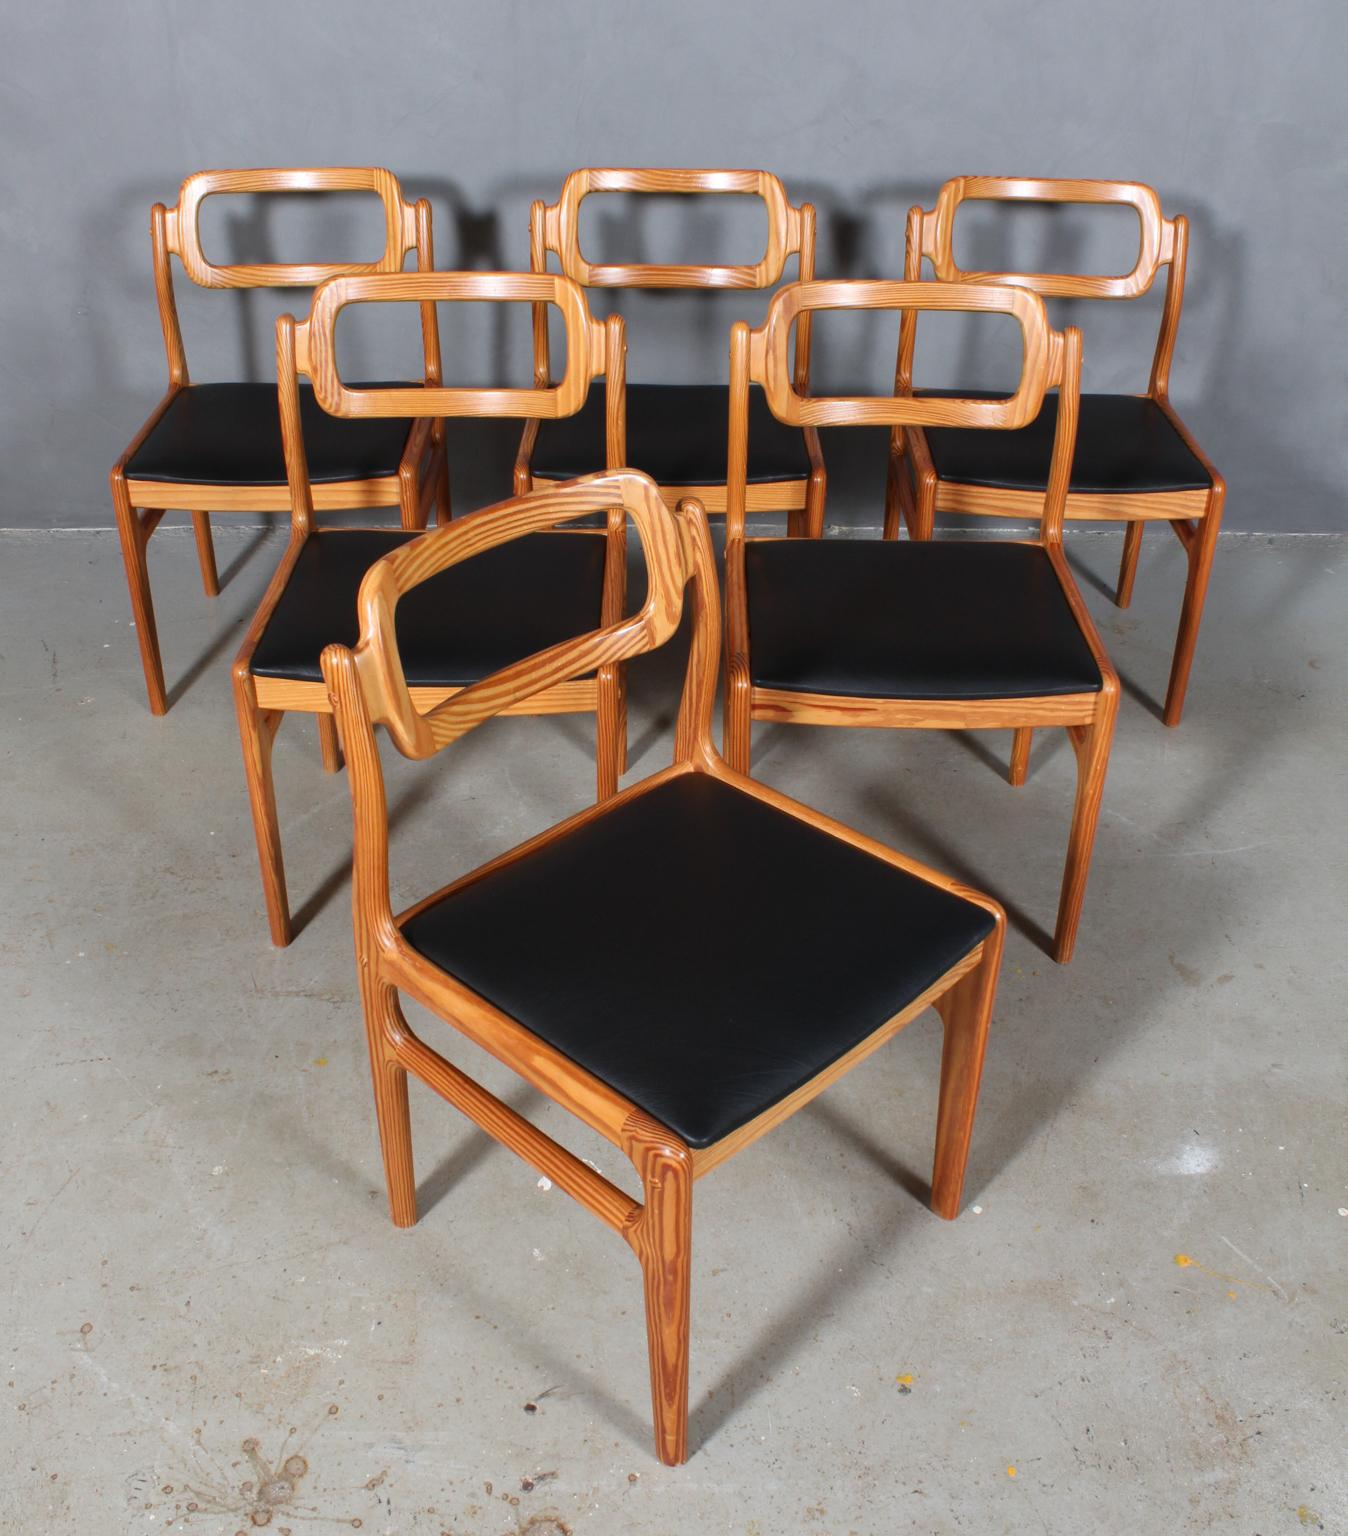 Set of six Johannes Andersen dining chair for Uldum Møbelfabrik, with frame of solid Oregon pine.

New upholstered with black pure aniline leather.

Made by Uldum Møbelfabrik.